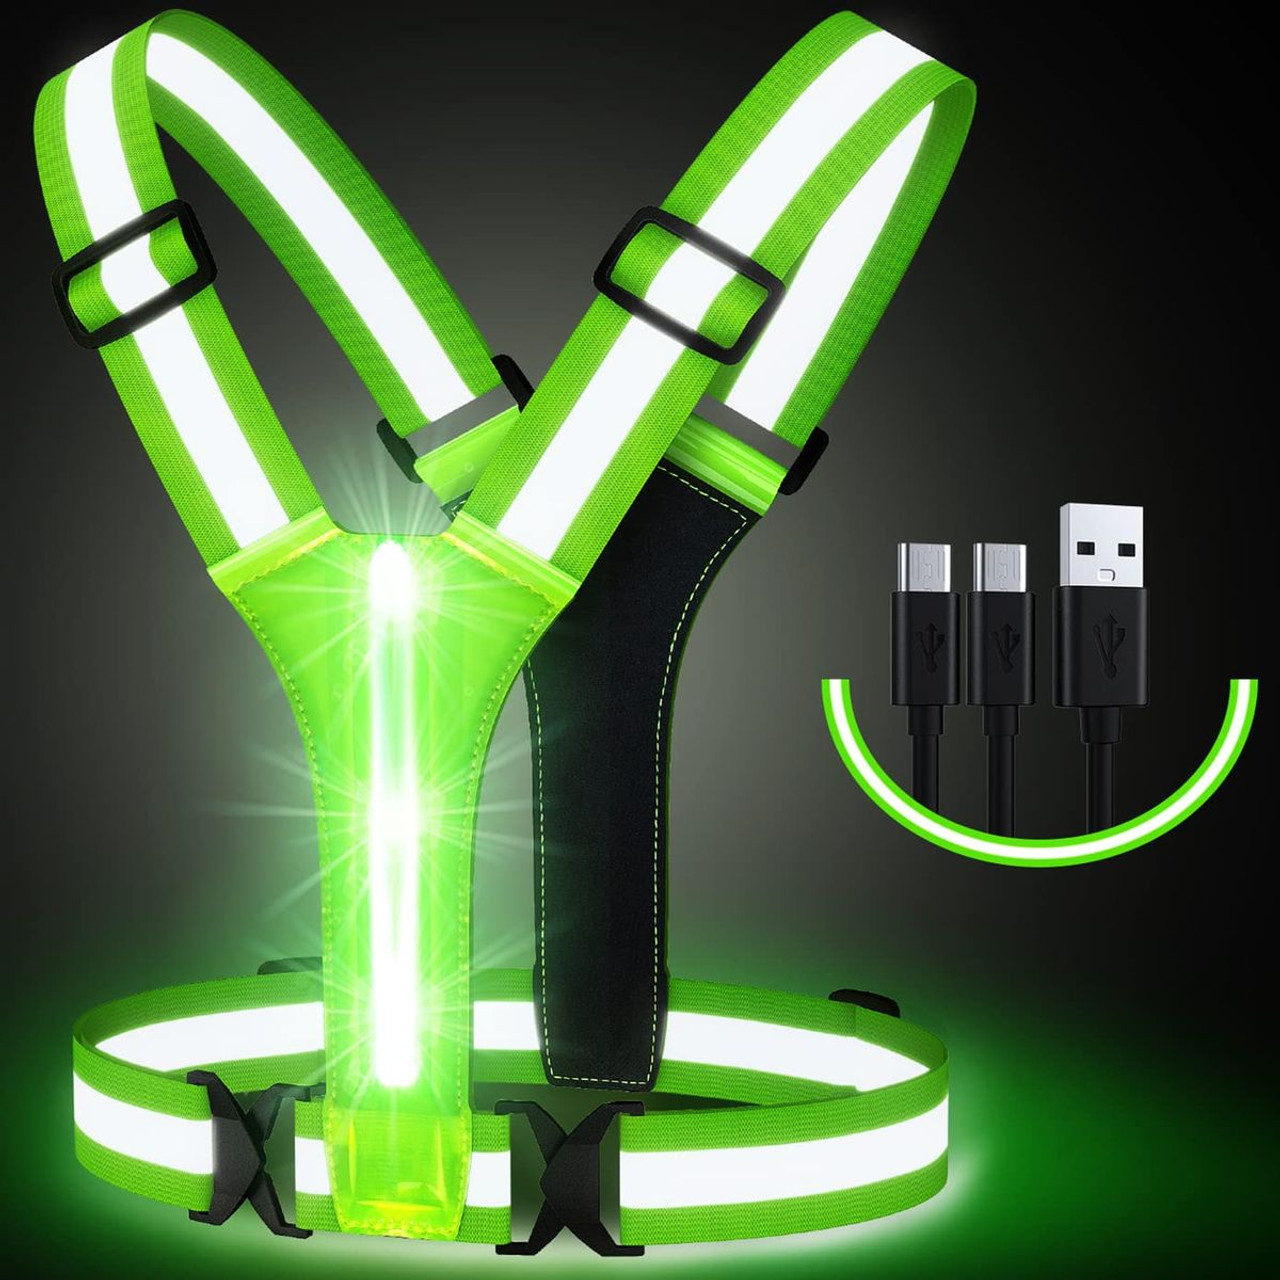 Led Light Up Running Vest Reflective Vest for Walking at Night,High Visibility Night Running Gear Rechargeable Adjustable Running Lights for Runners Walkers Men Women product image